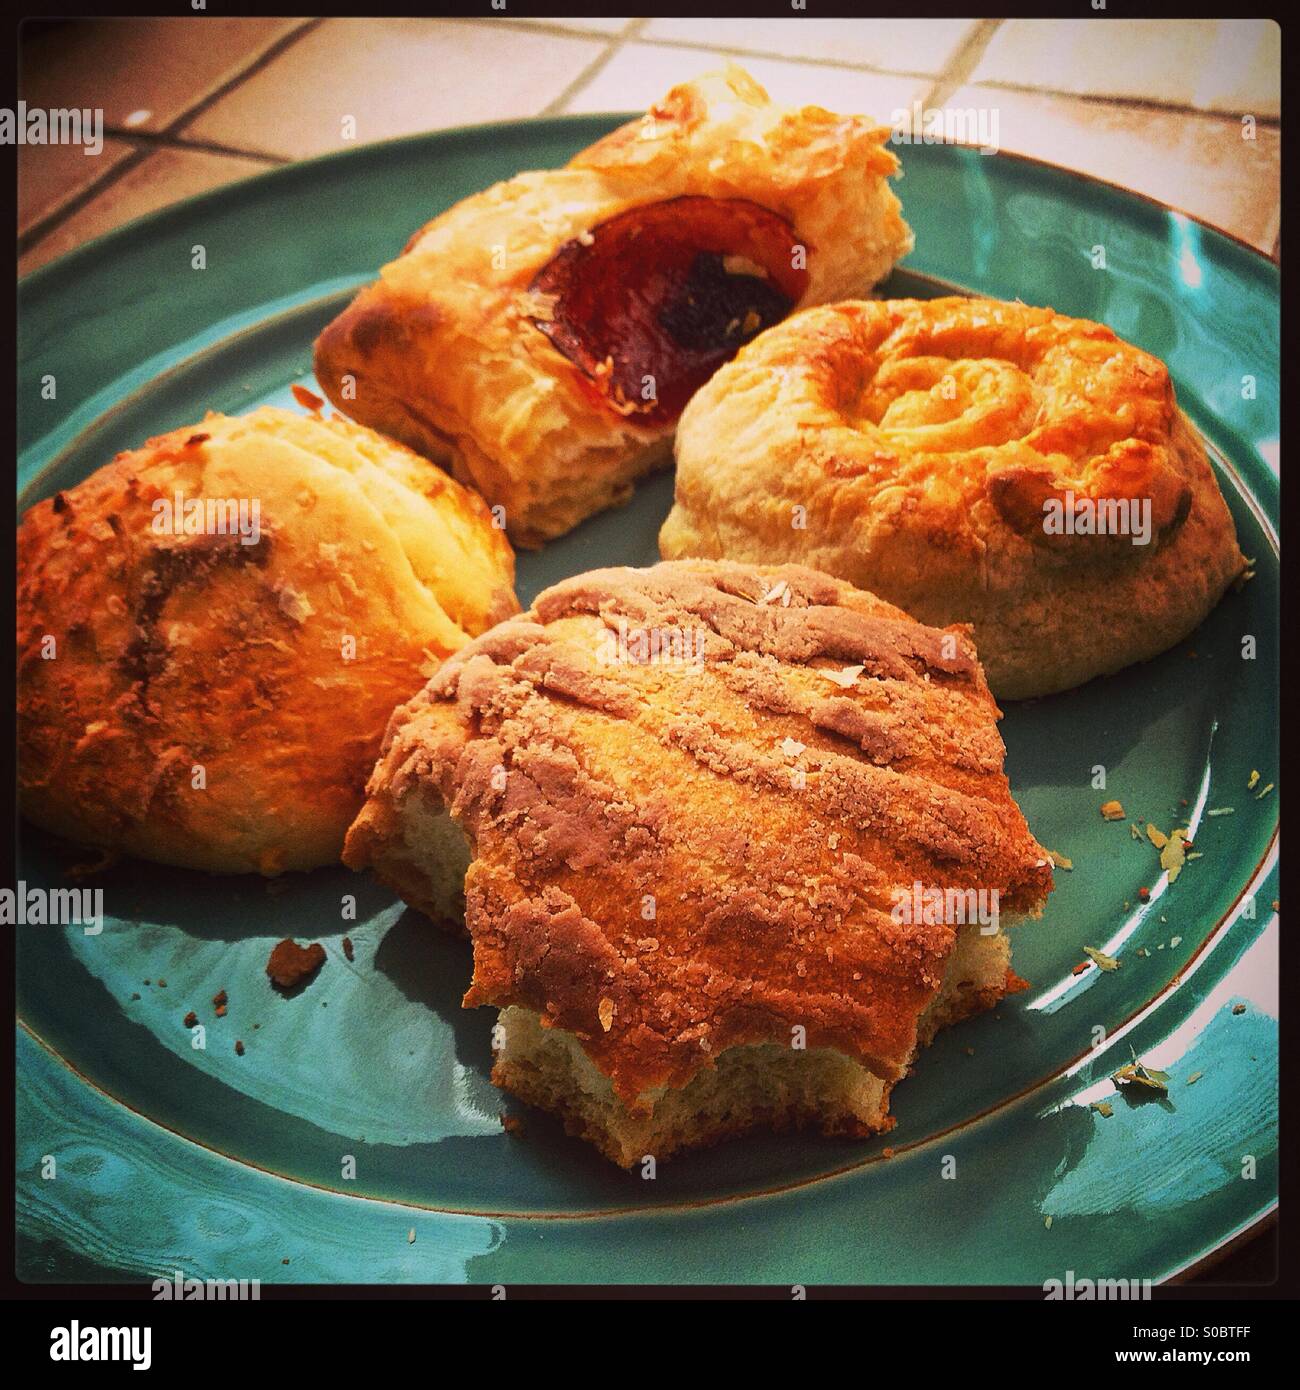 Pastries on a plate with one having multiple bytes around the edges Stock Photo